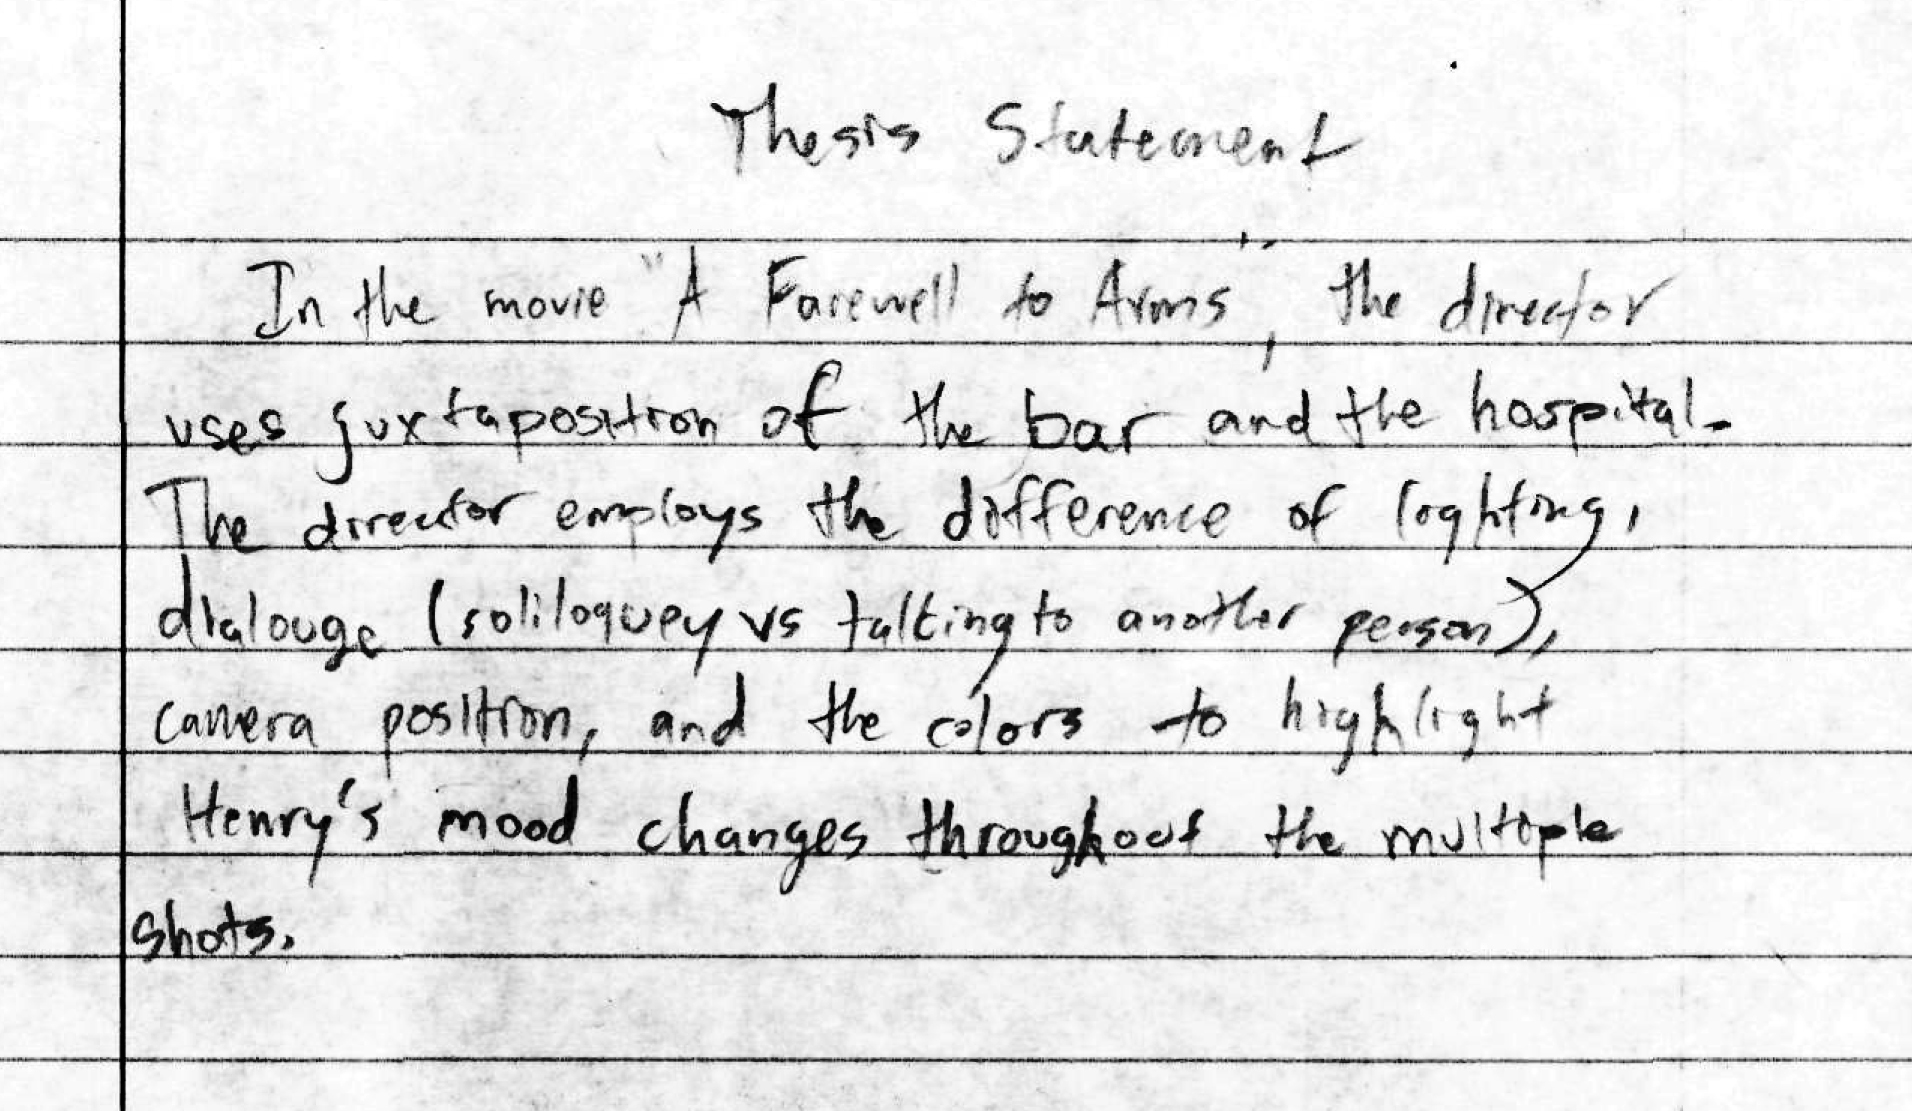 example of a good thesis statement for an essay